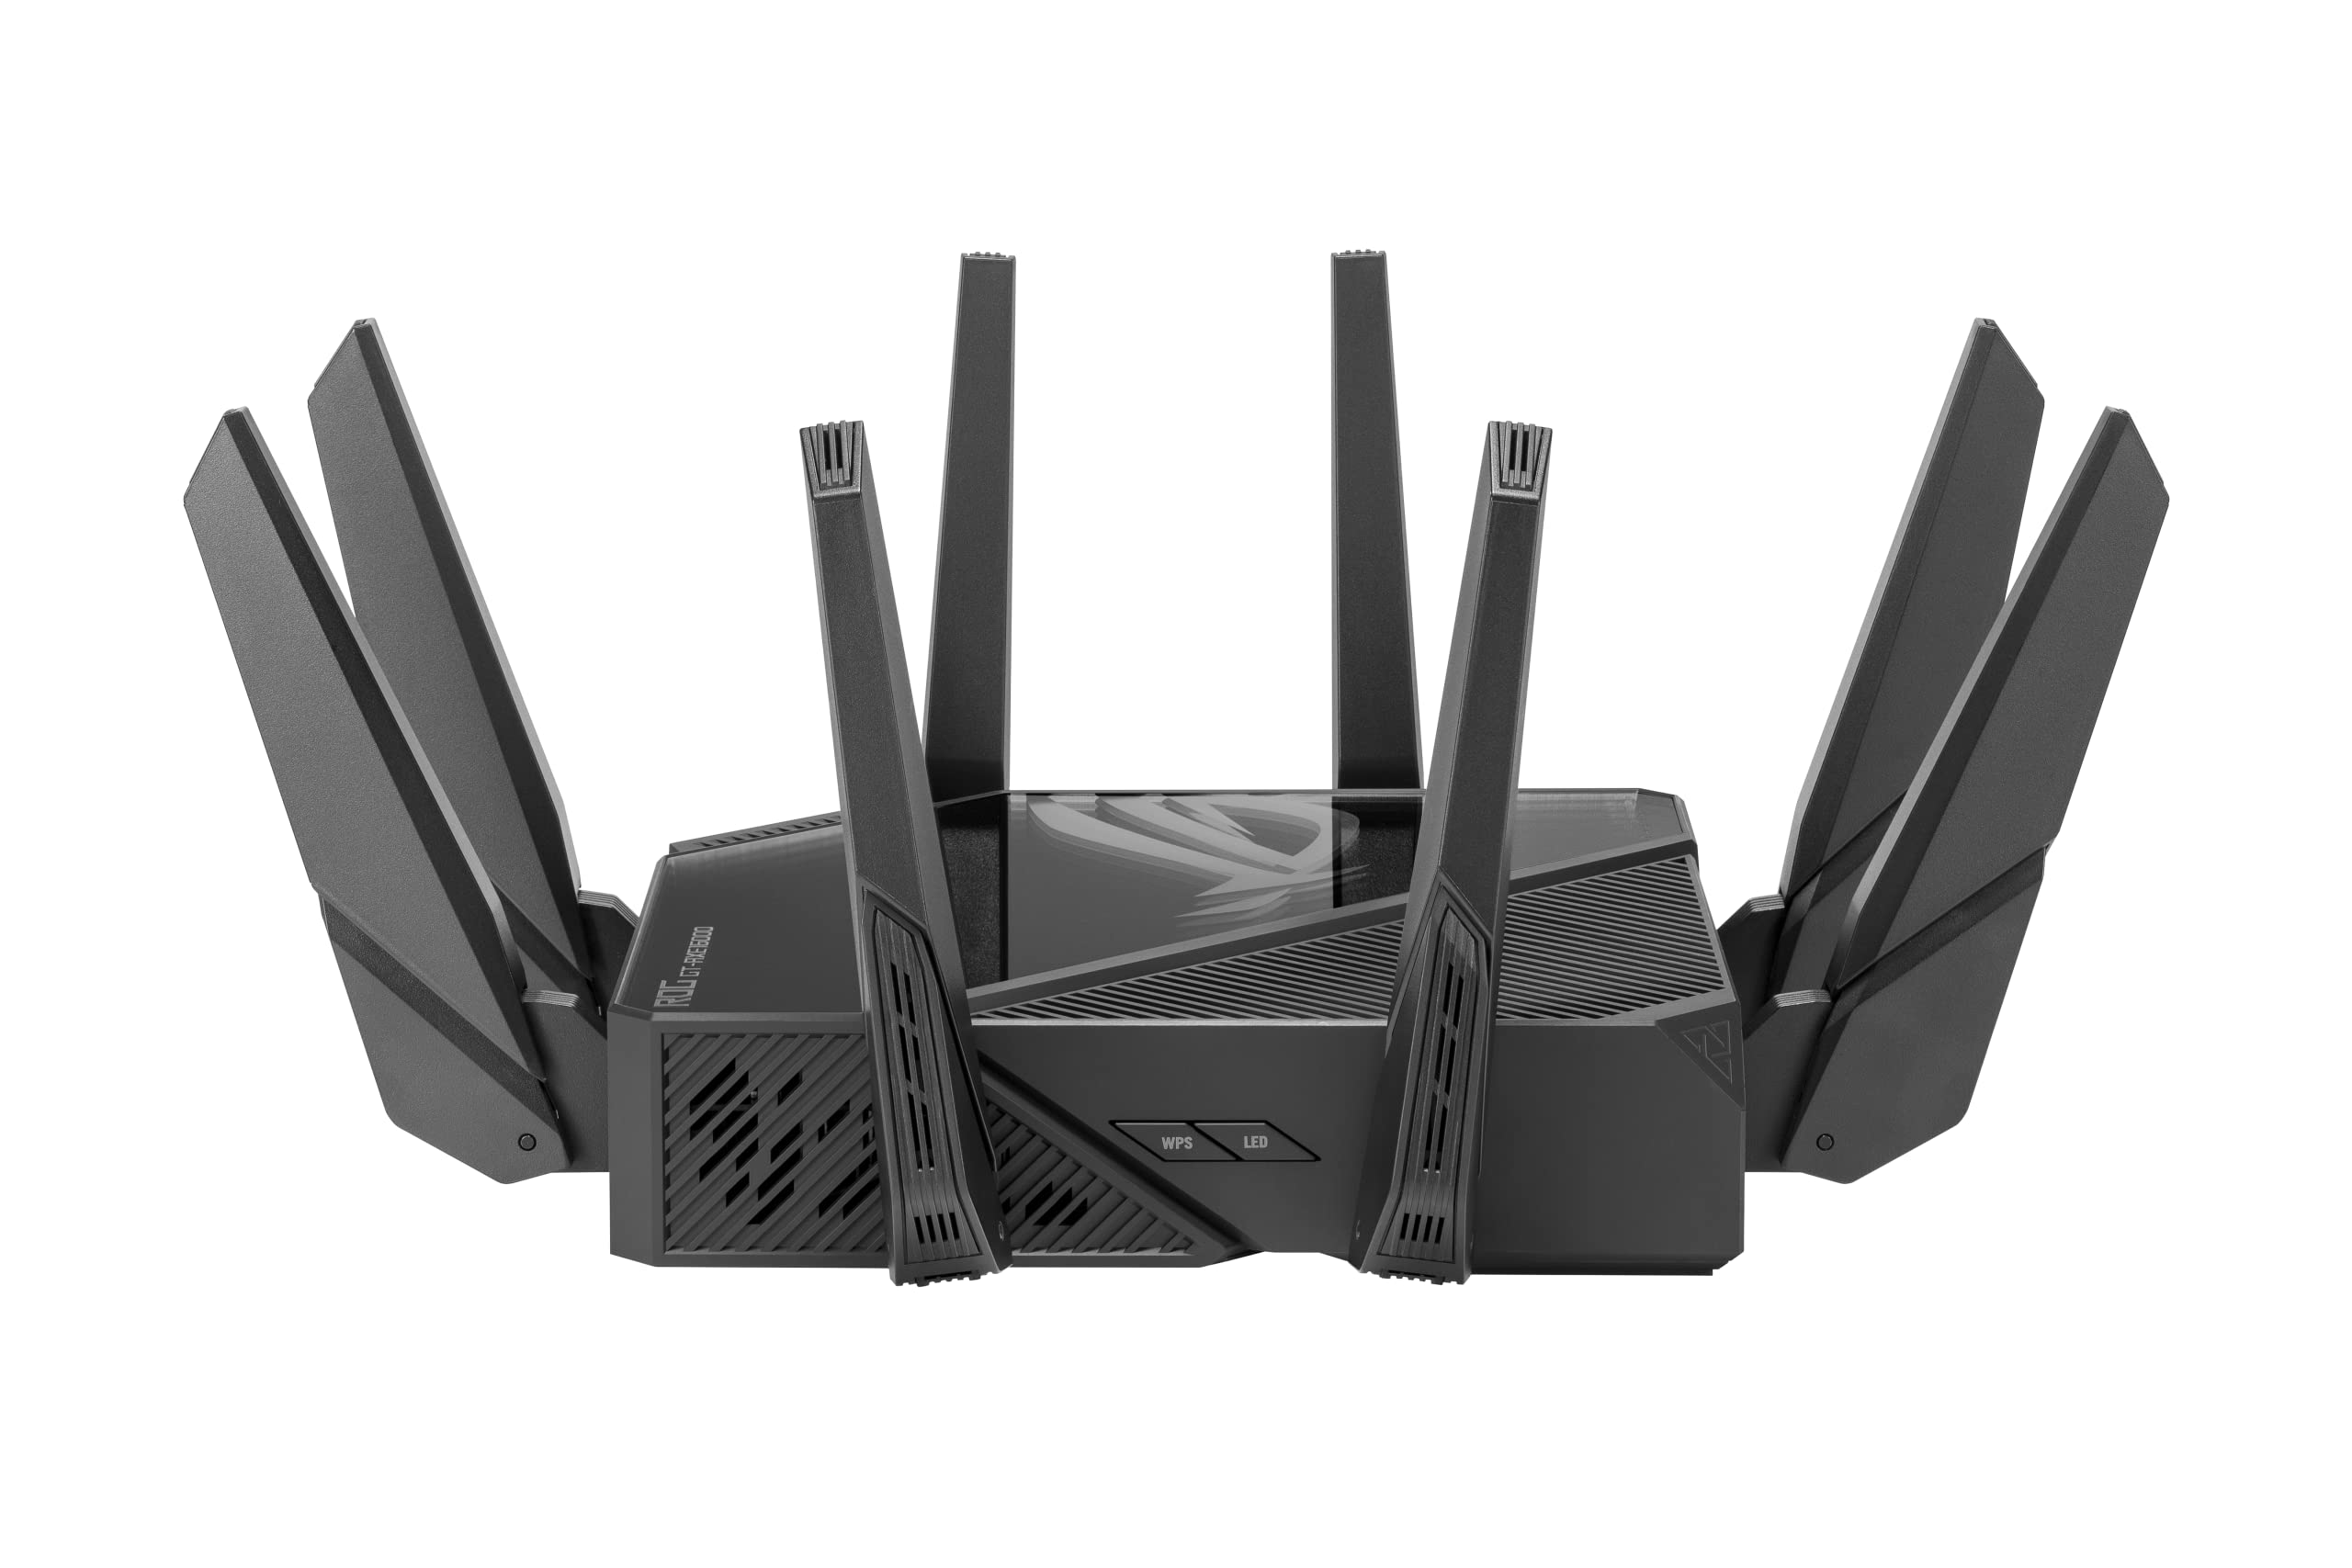 ASUS ROG Rapture GT-AXE16000 Quad-band WiFi 6E Extendable Gaming Router, 6GHz Band, Dual 10G Ports, 2.5G WAN Port, ASUS RangeBoost Plus, Triple-level Game Acceleration, VPN Fusion, AiMesh Compatible